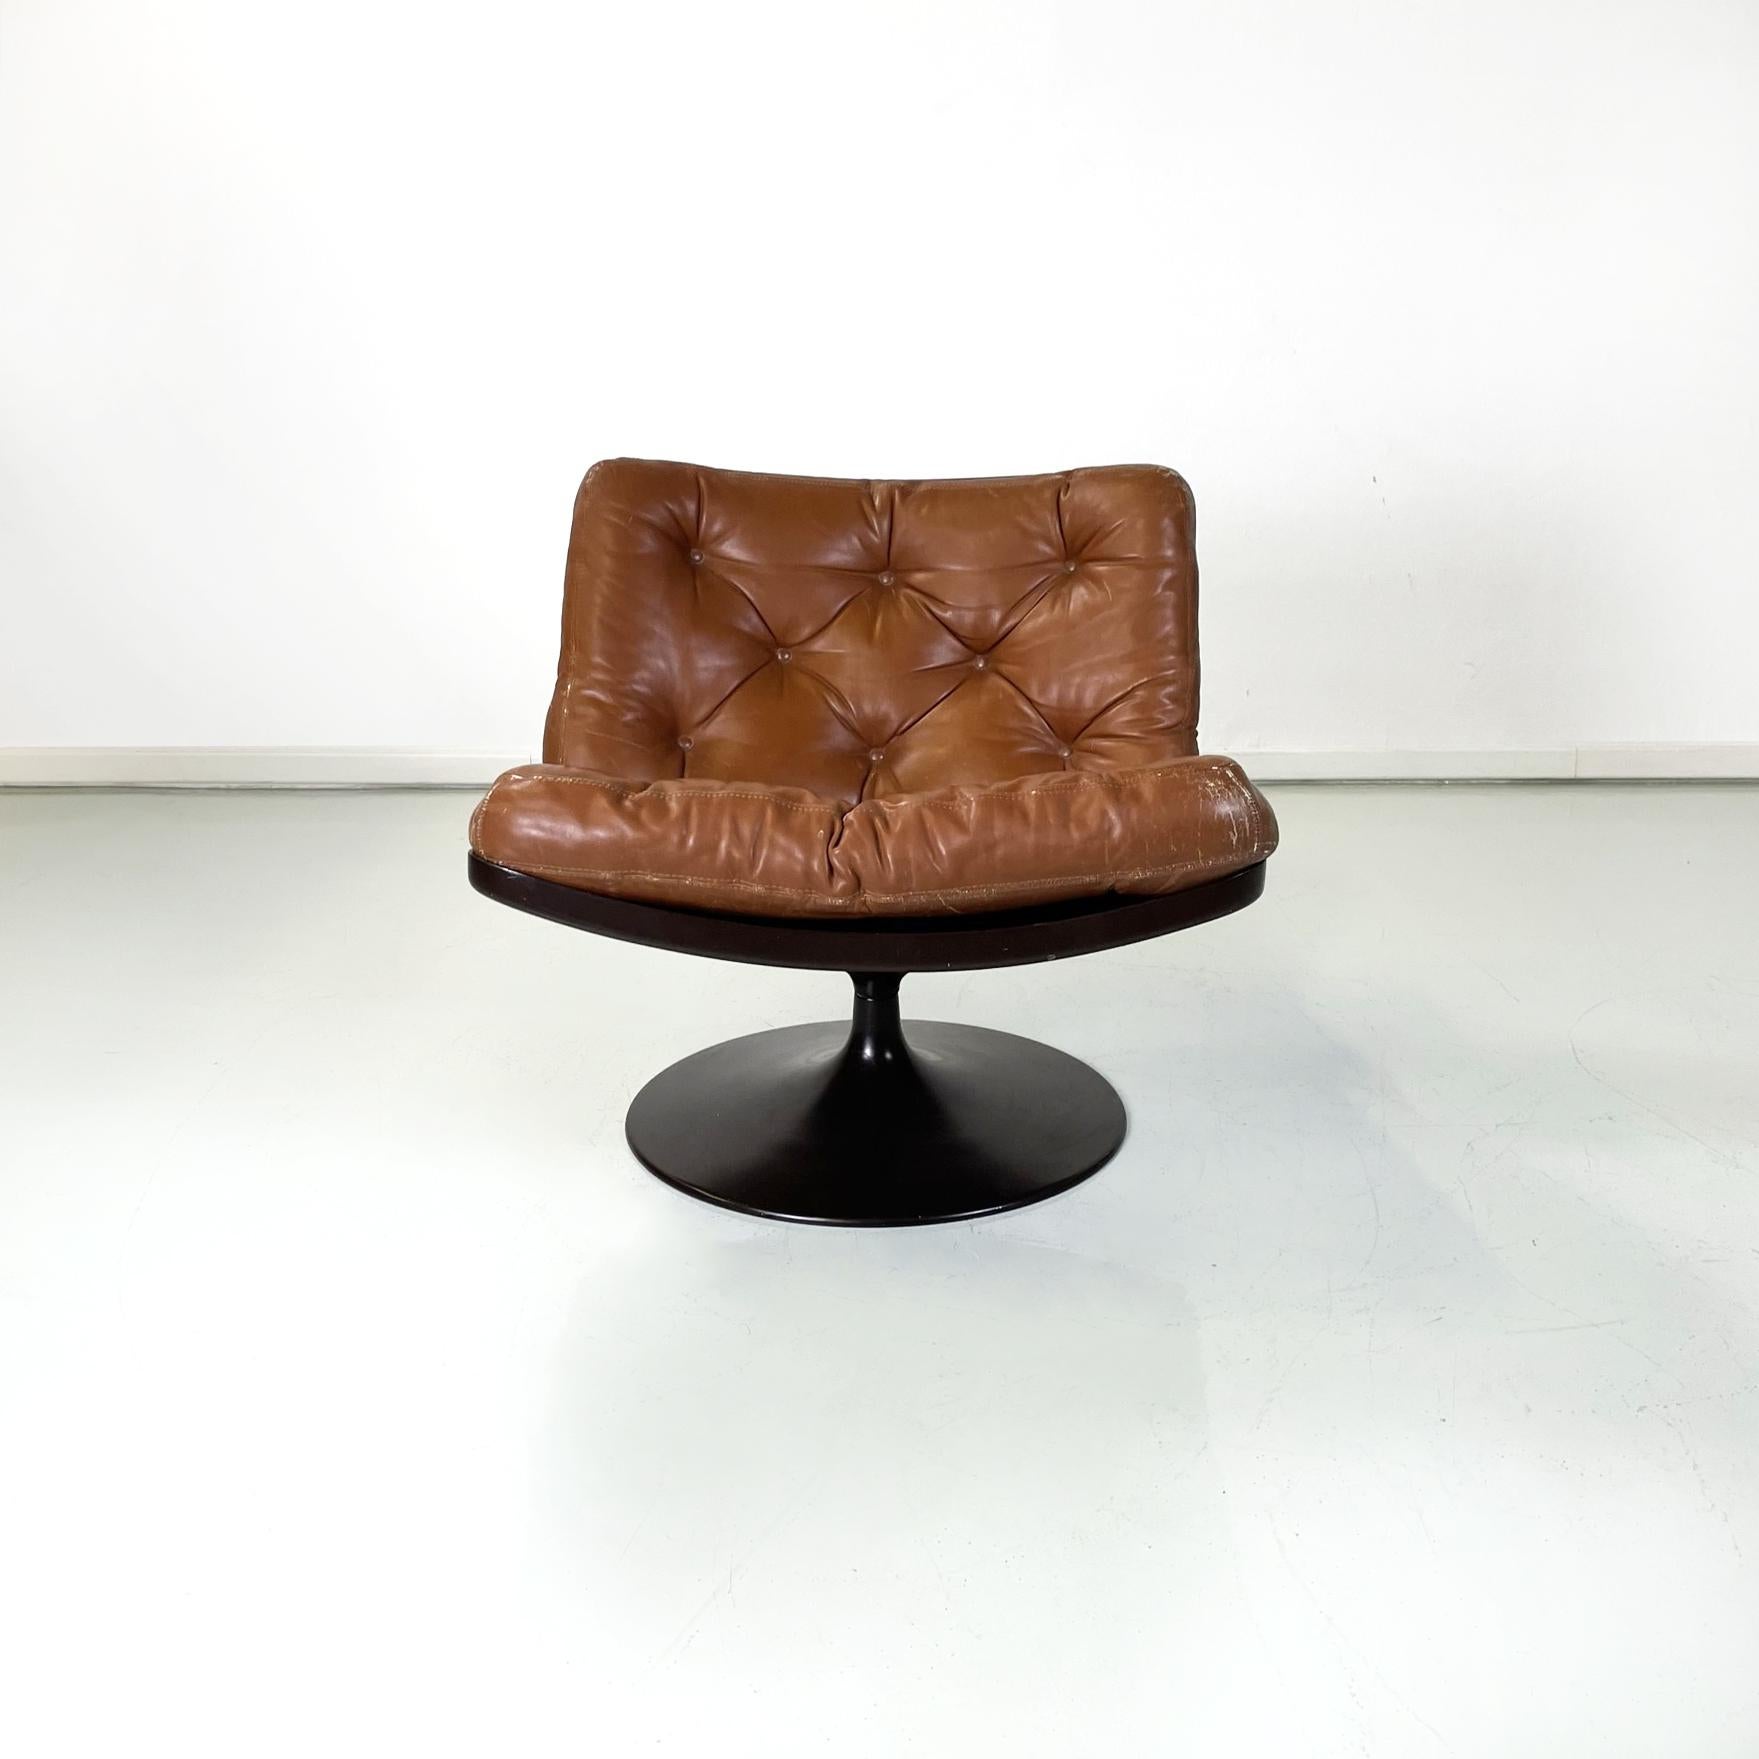 Italian space age armchair in brown leather and black plastic by Play, 1970s
Armchair with Tulip style swivel round base in black abs. The seat and back are composed of two padded and stitched cushions in brown leather.
Produced by Play in